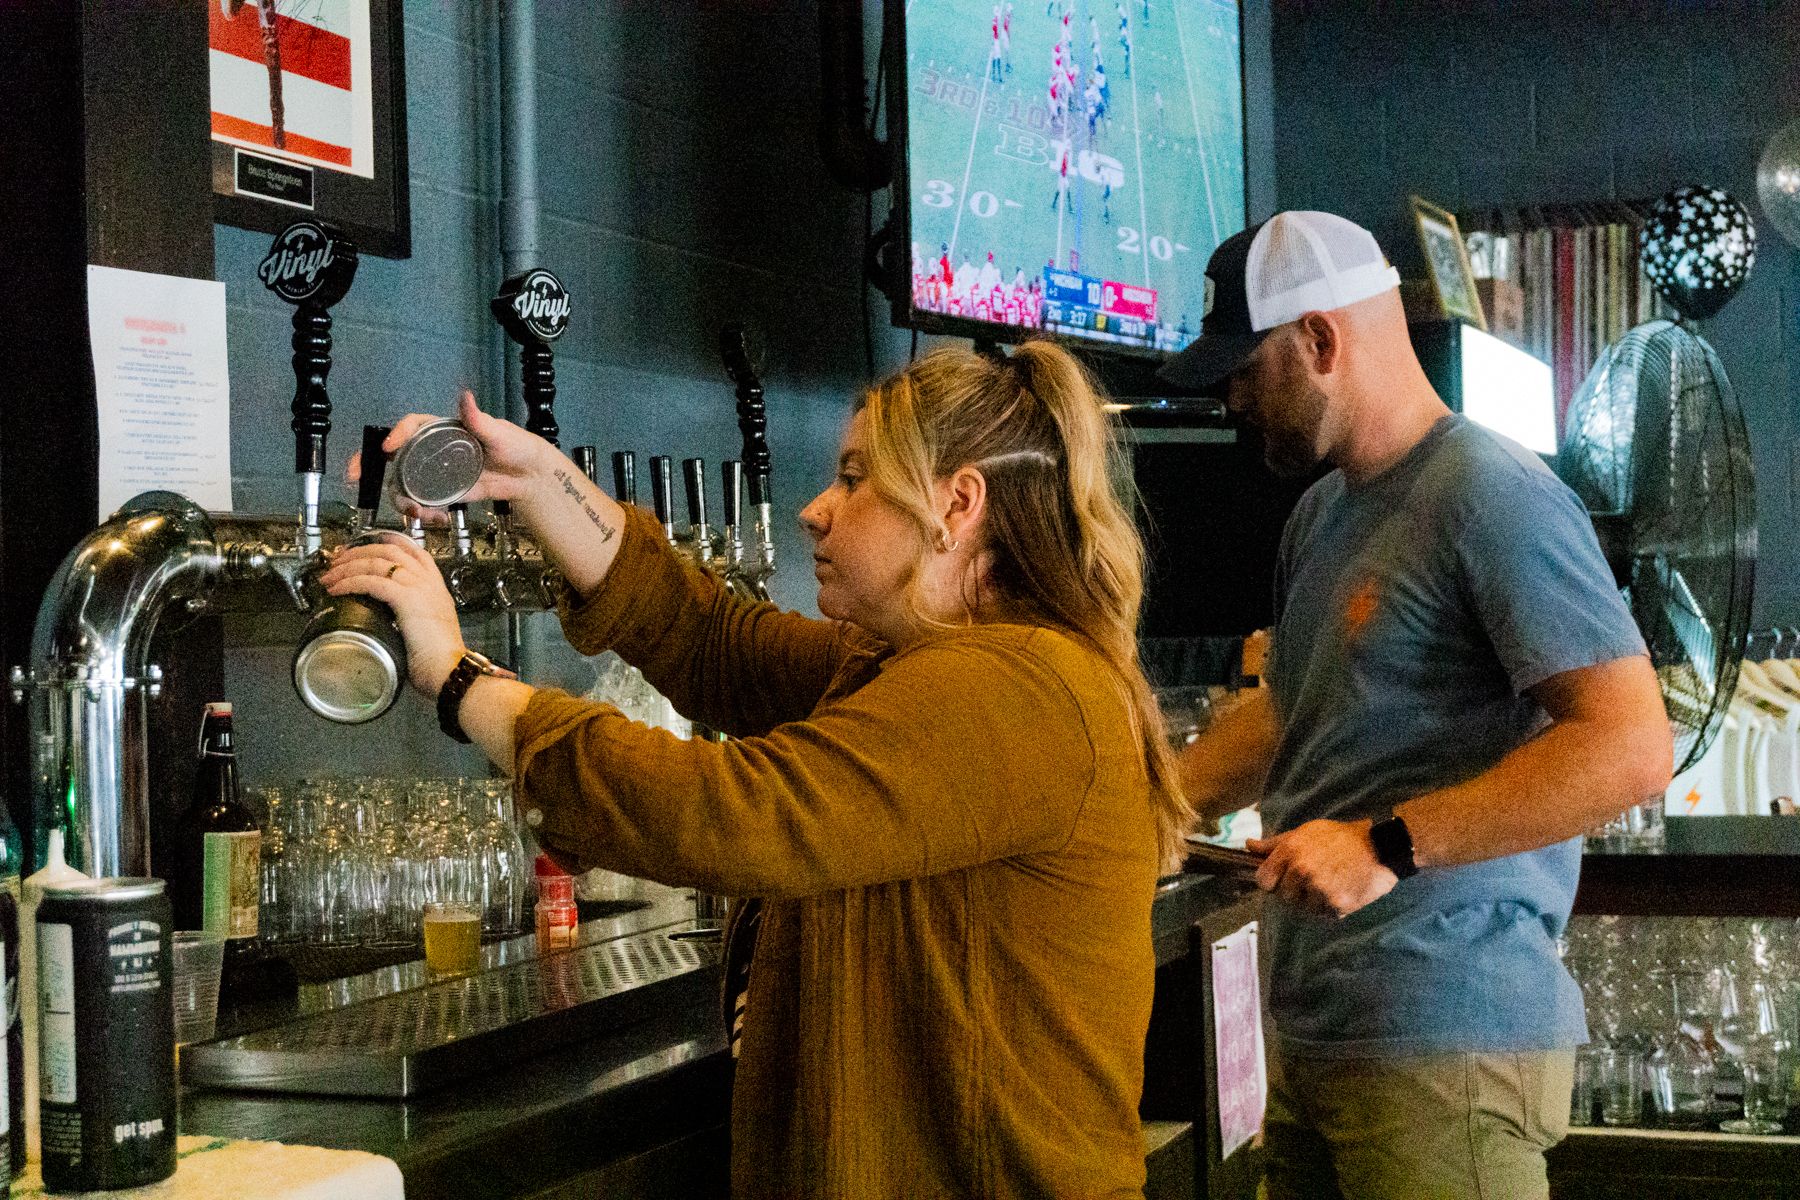 Pouring beers during Vinyl Brewing's VinylMania event in 2021